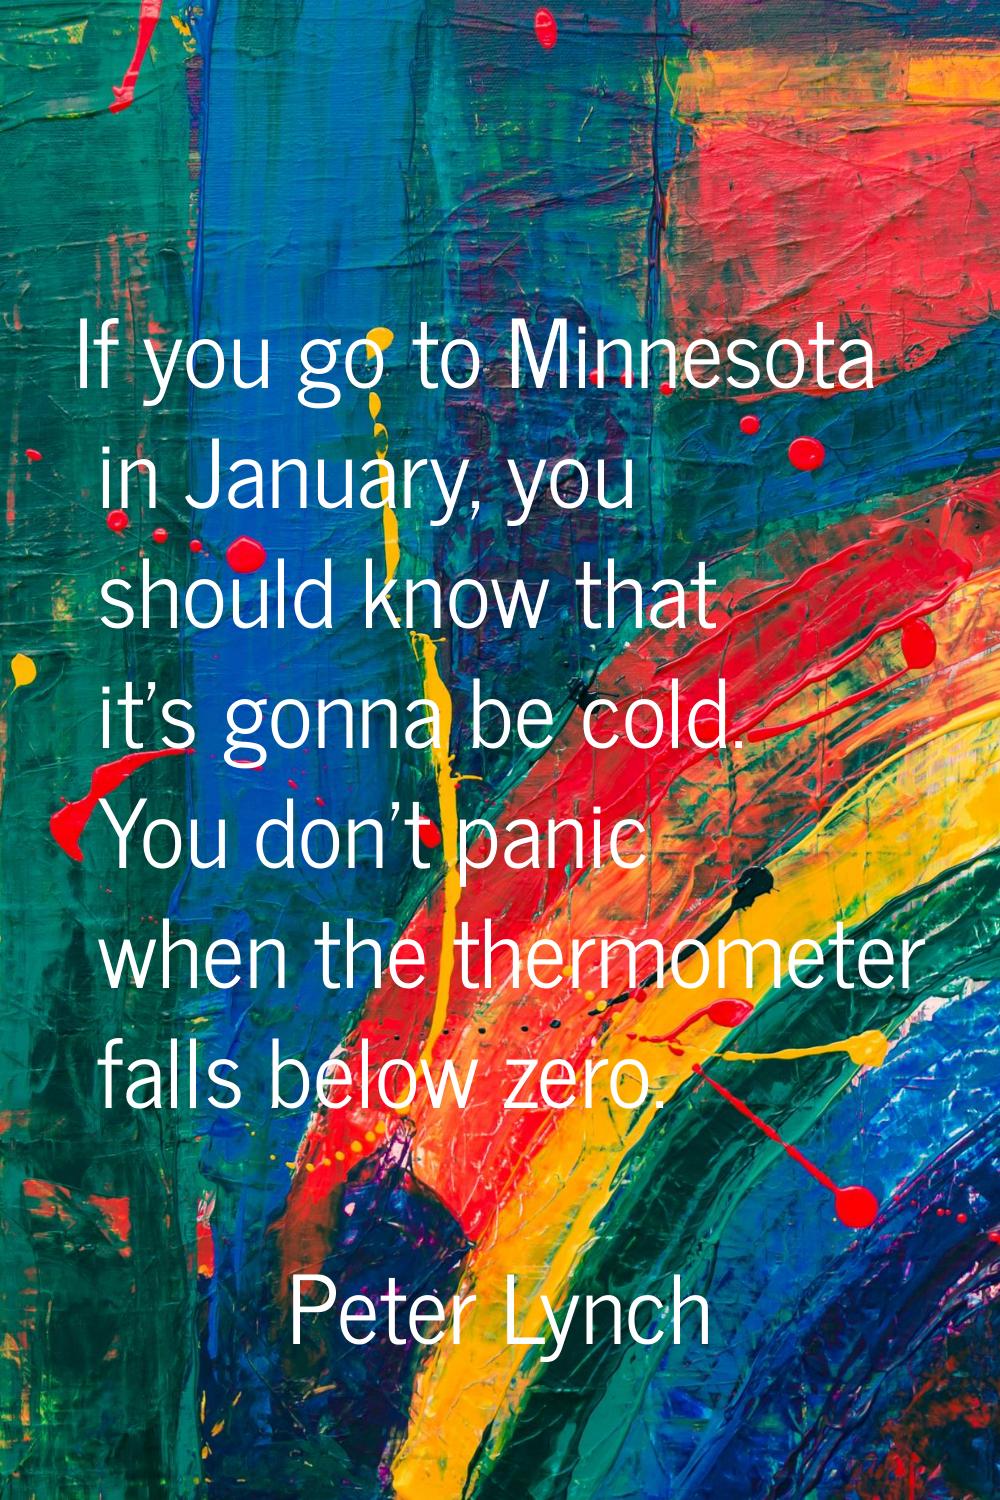 If you go to Minnesota in January, you should know that it's gonna be cold. You don't panic when th